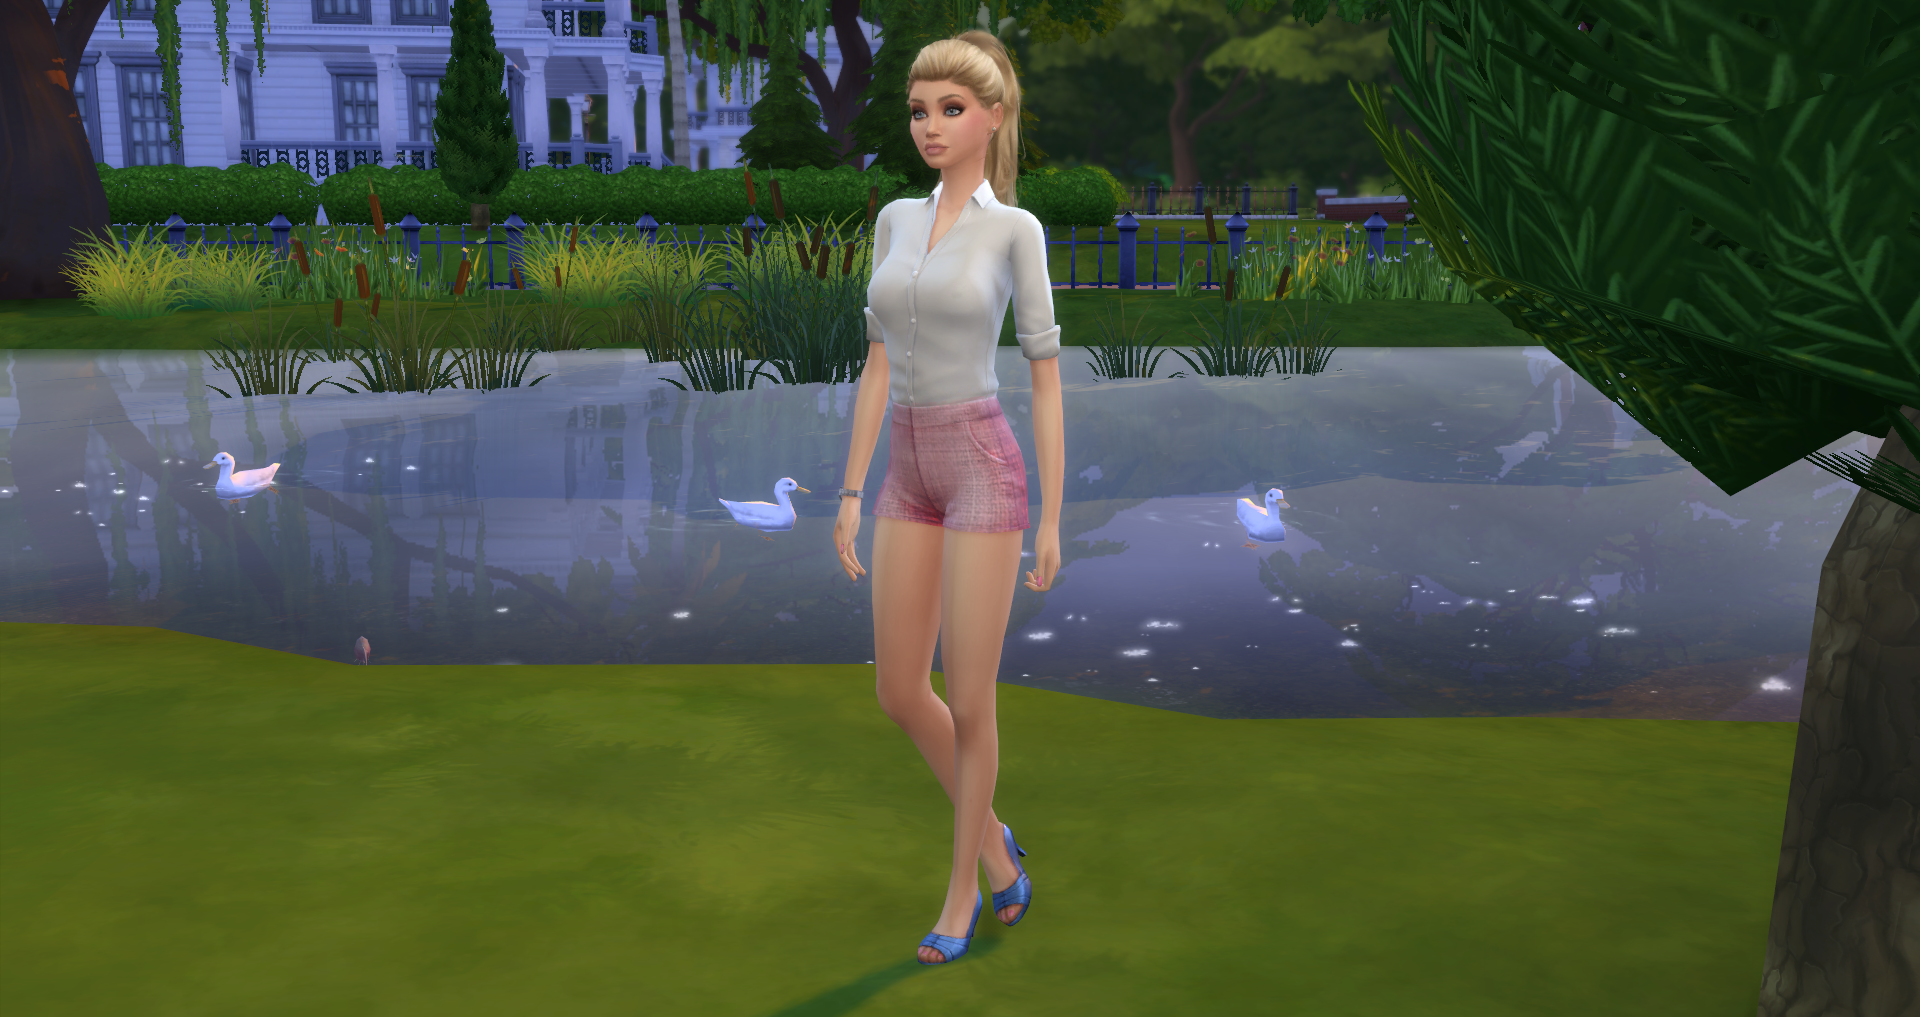 627844293_erplederpNewOutfits-VeronicaEveryday.png.1518249fb23707f4ed93158201cadc84.png